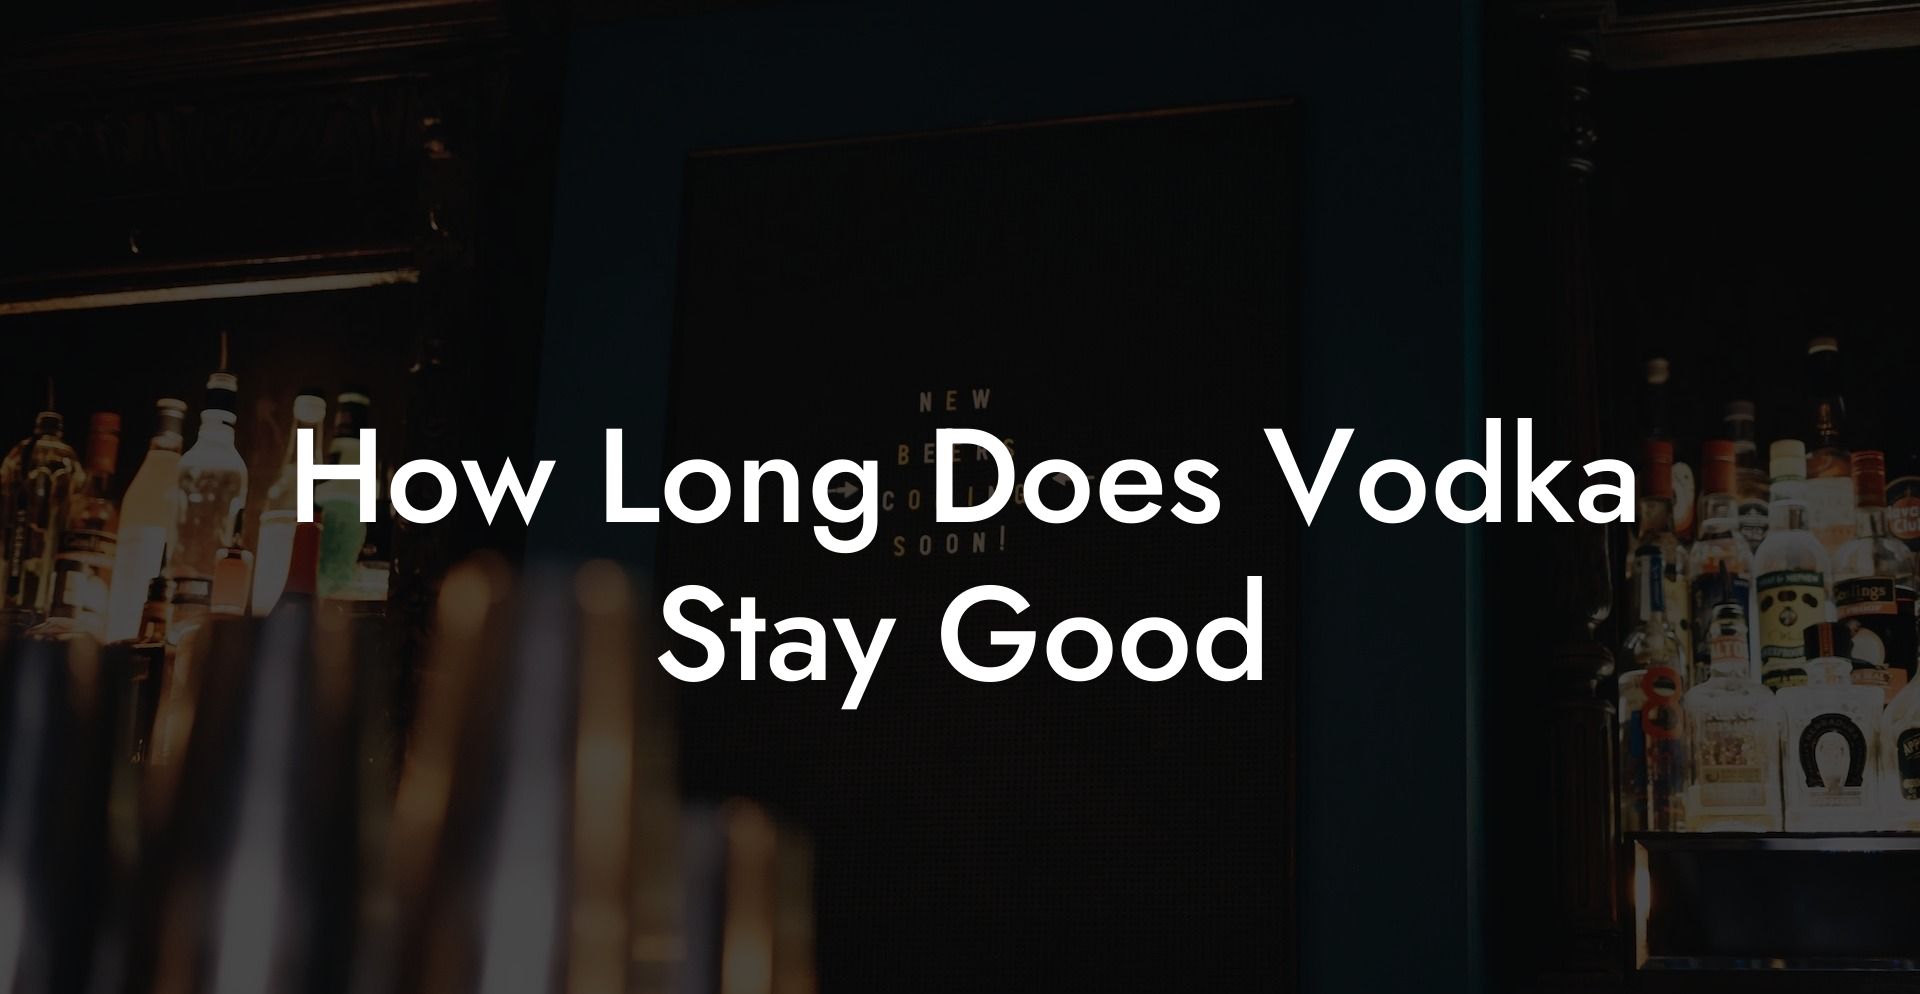 How Long Does Vodka Stay Good